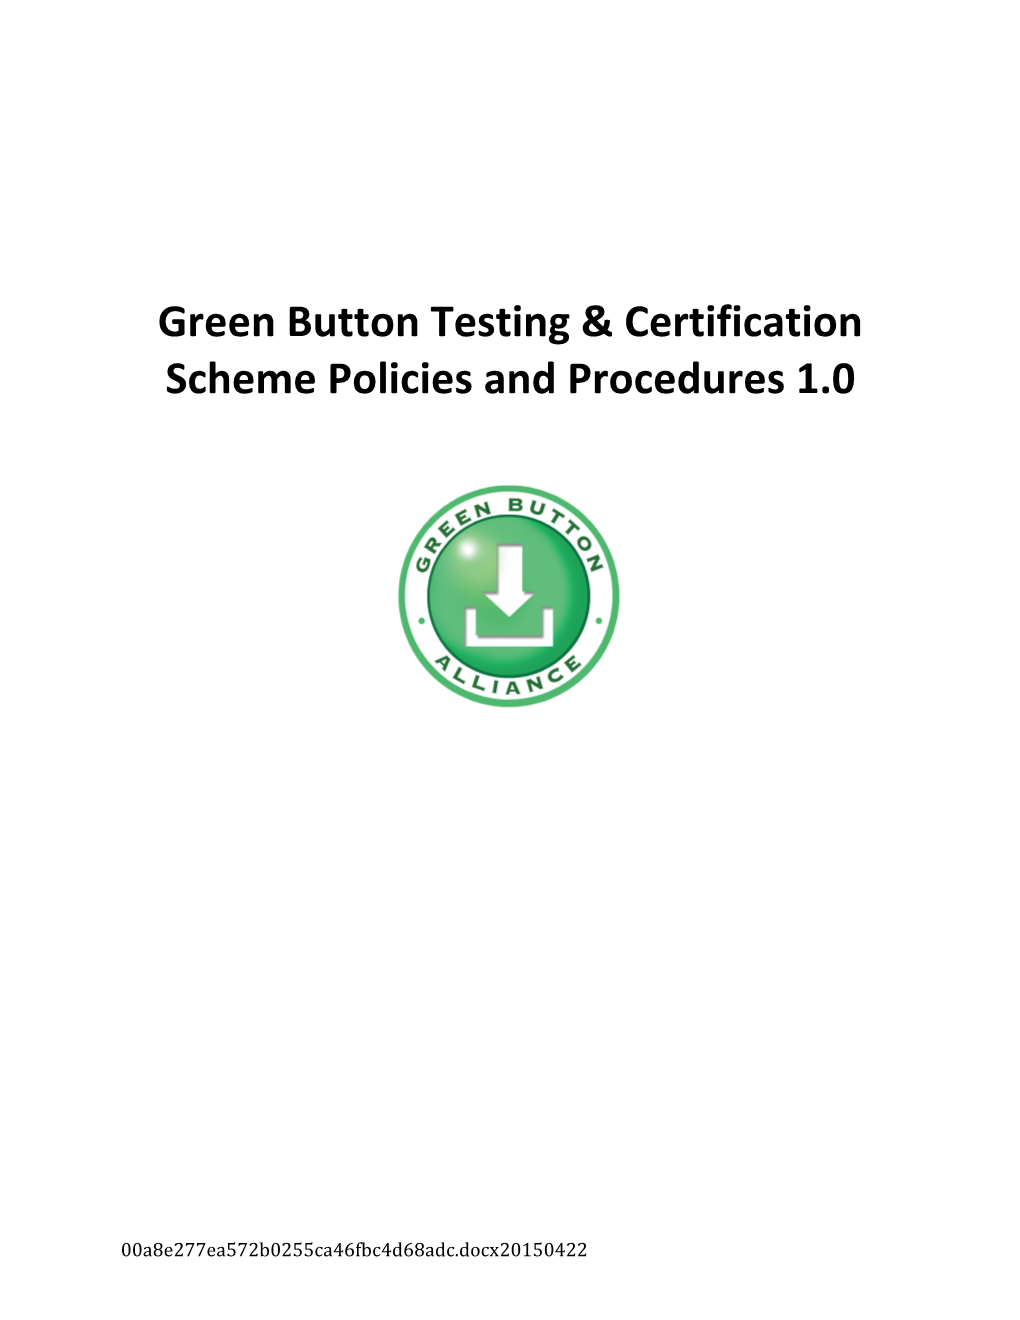 Green Button Testing & Certification Scheme Policies and Procedures